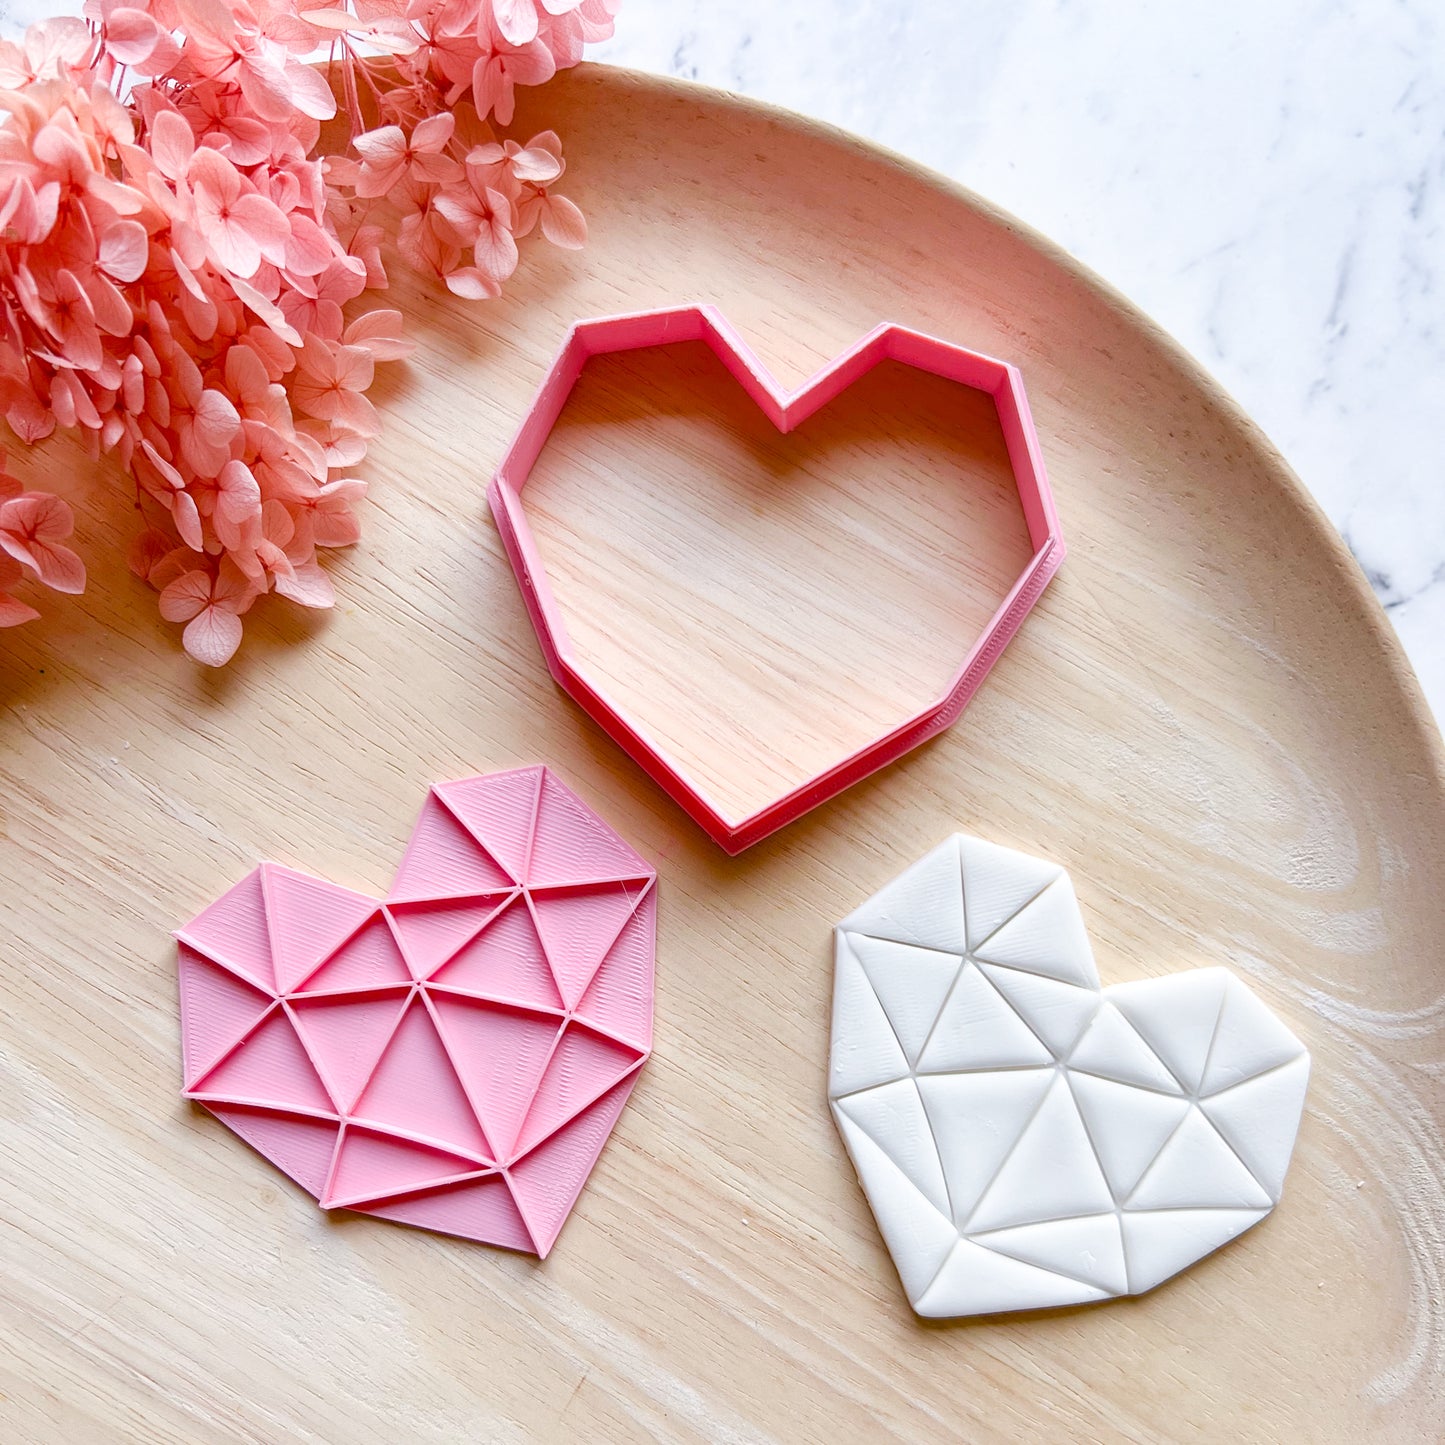 Origami Heart Cookie Cutter & Stamp